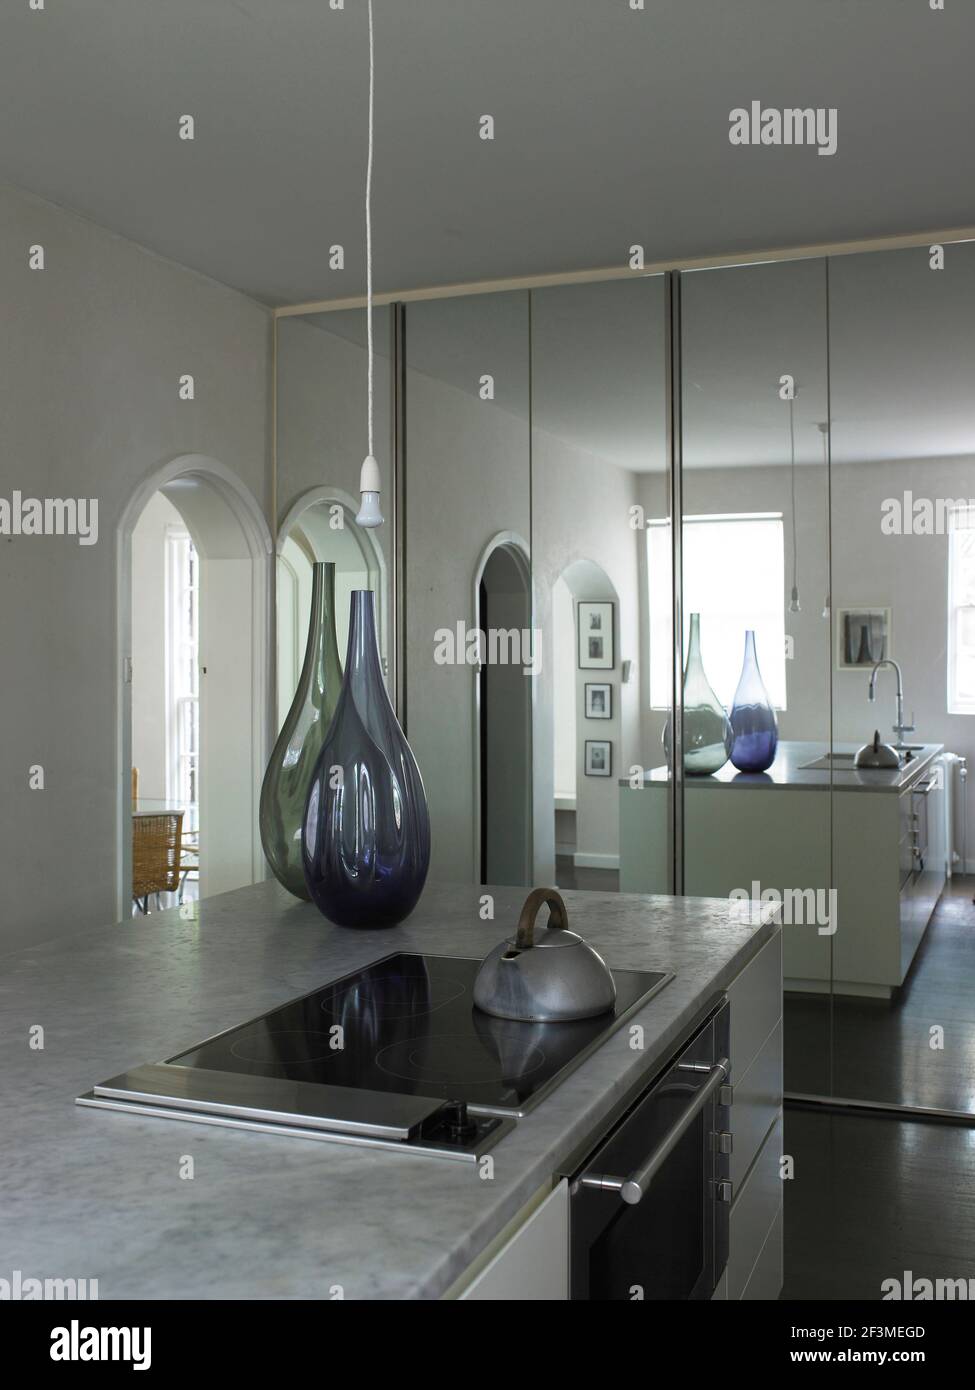 Island unit with kettle and glass necked vases in kitchen with mirrored wall in residential house, Australia Stock Photo